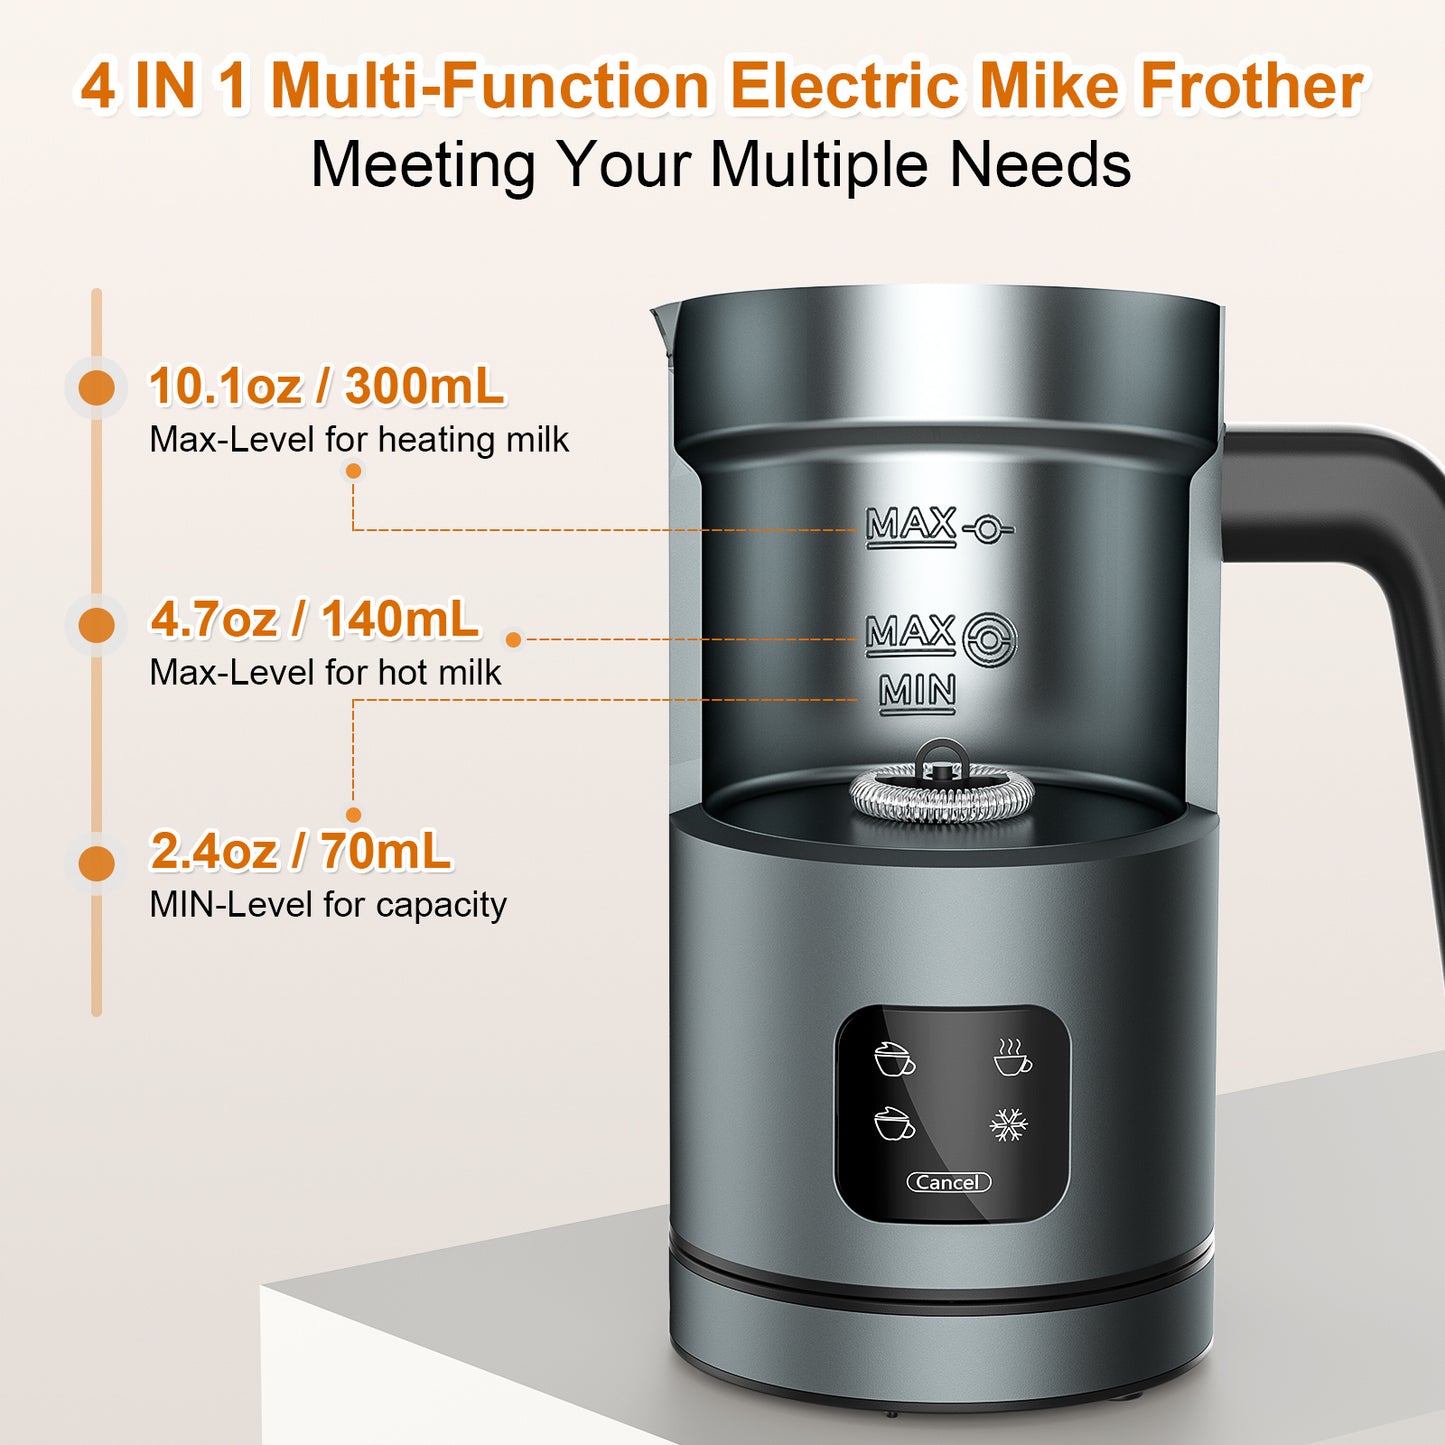 4 IN 1 Automatic Milk Warmer, Frother, Hot And Cold Foam